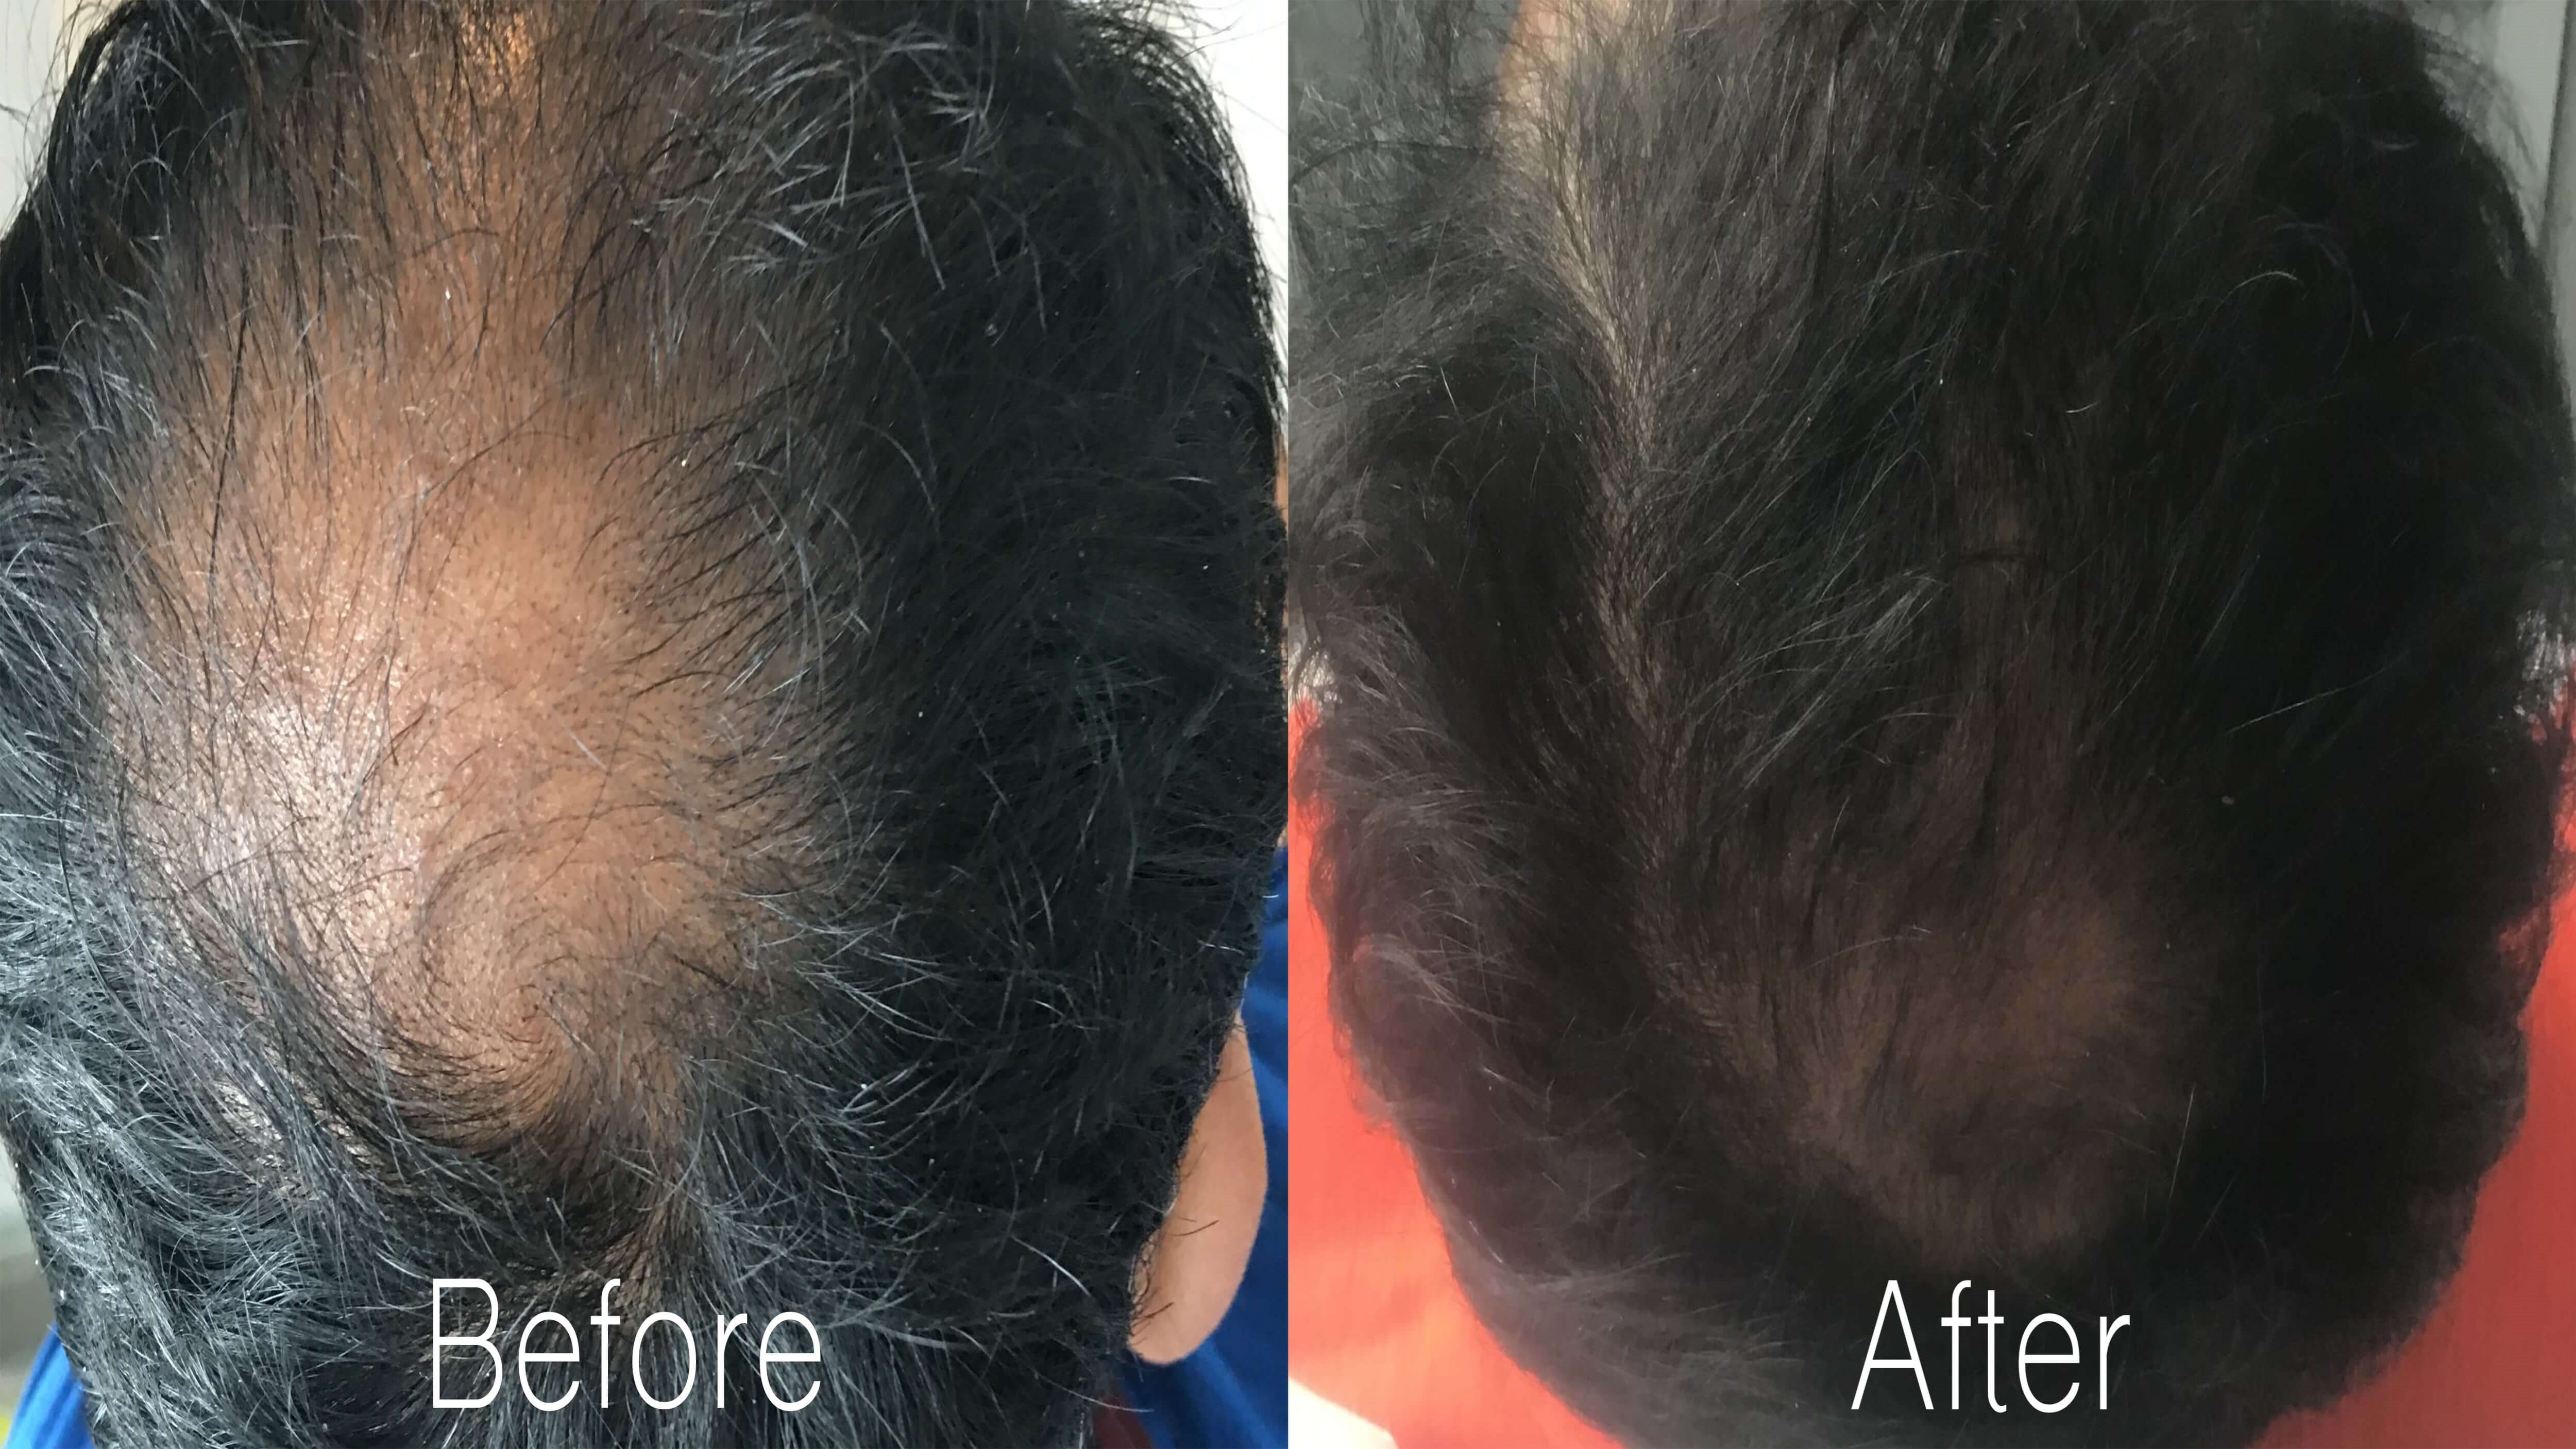 Regrow Your Own Hair Using Microneedling With PRP and RF